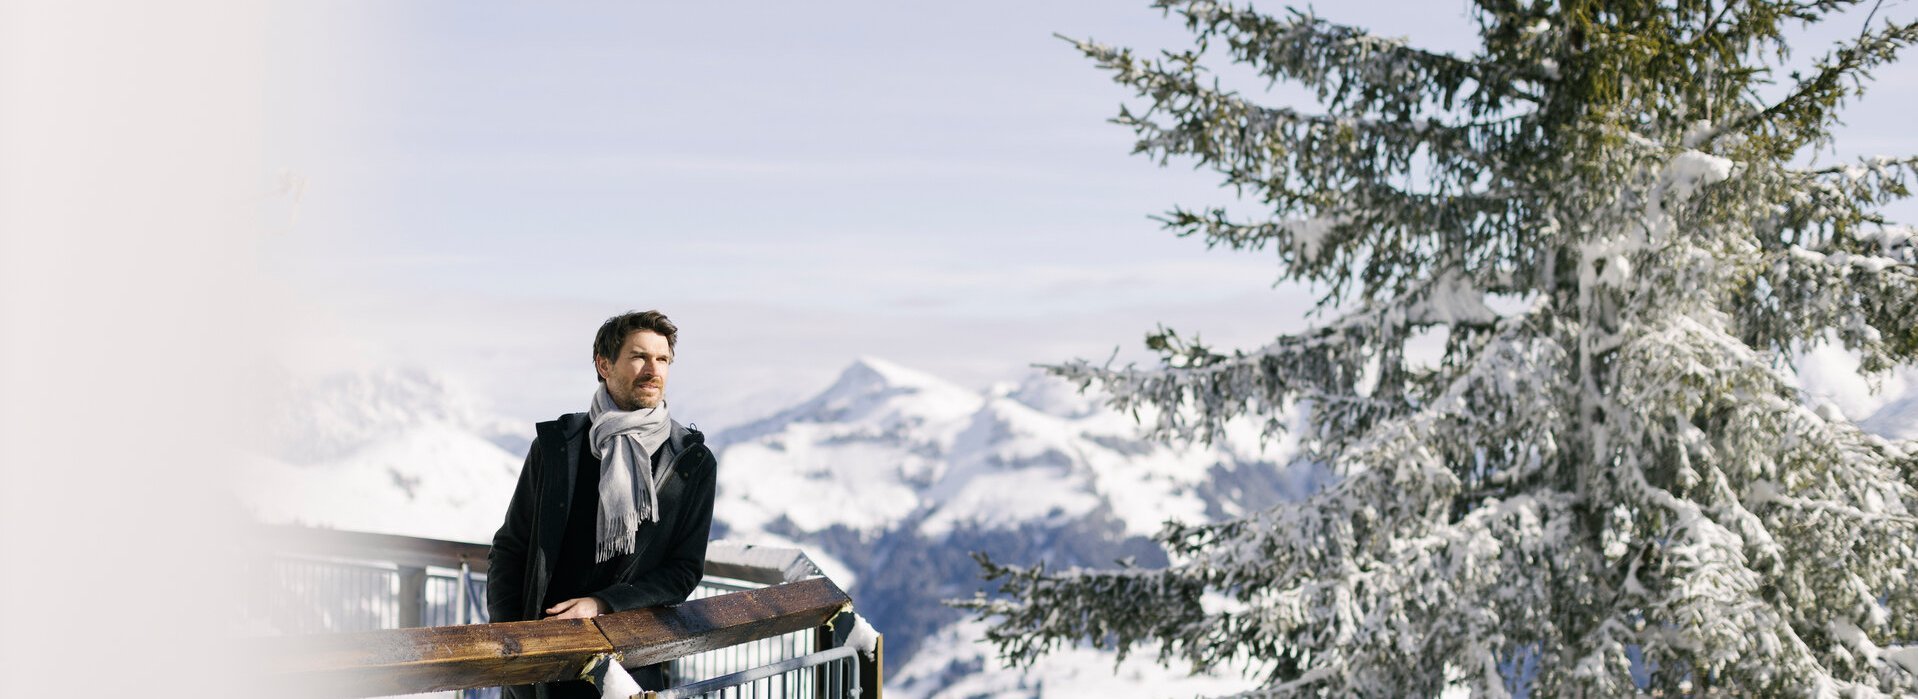 A gentleman enjoys the view of the mountain winter landscape on the Hahnenkamm on a sunny day